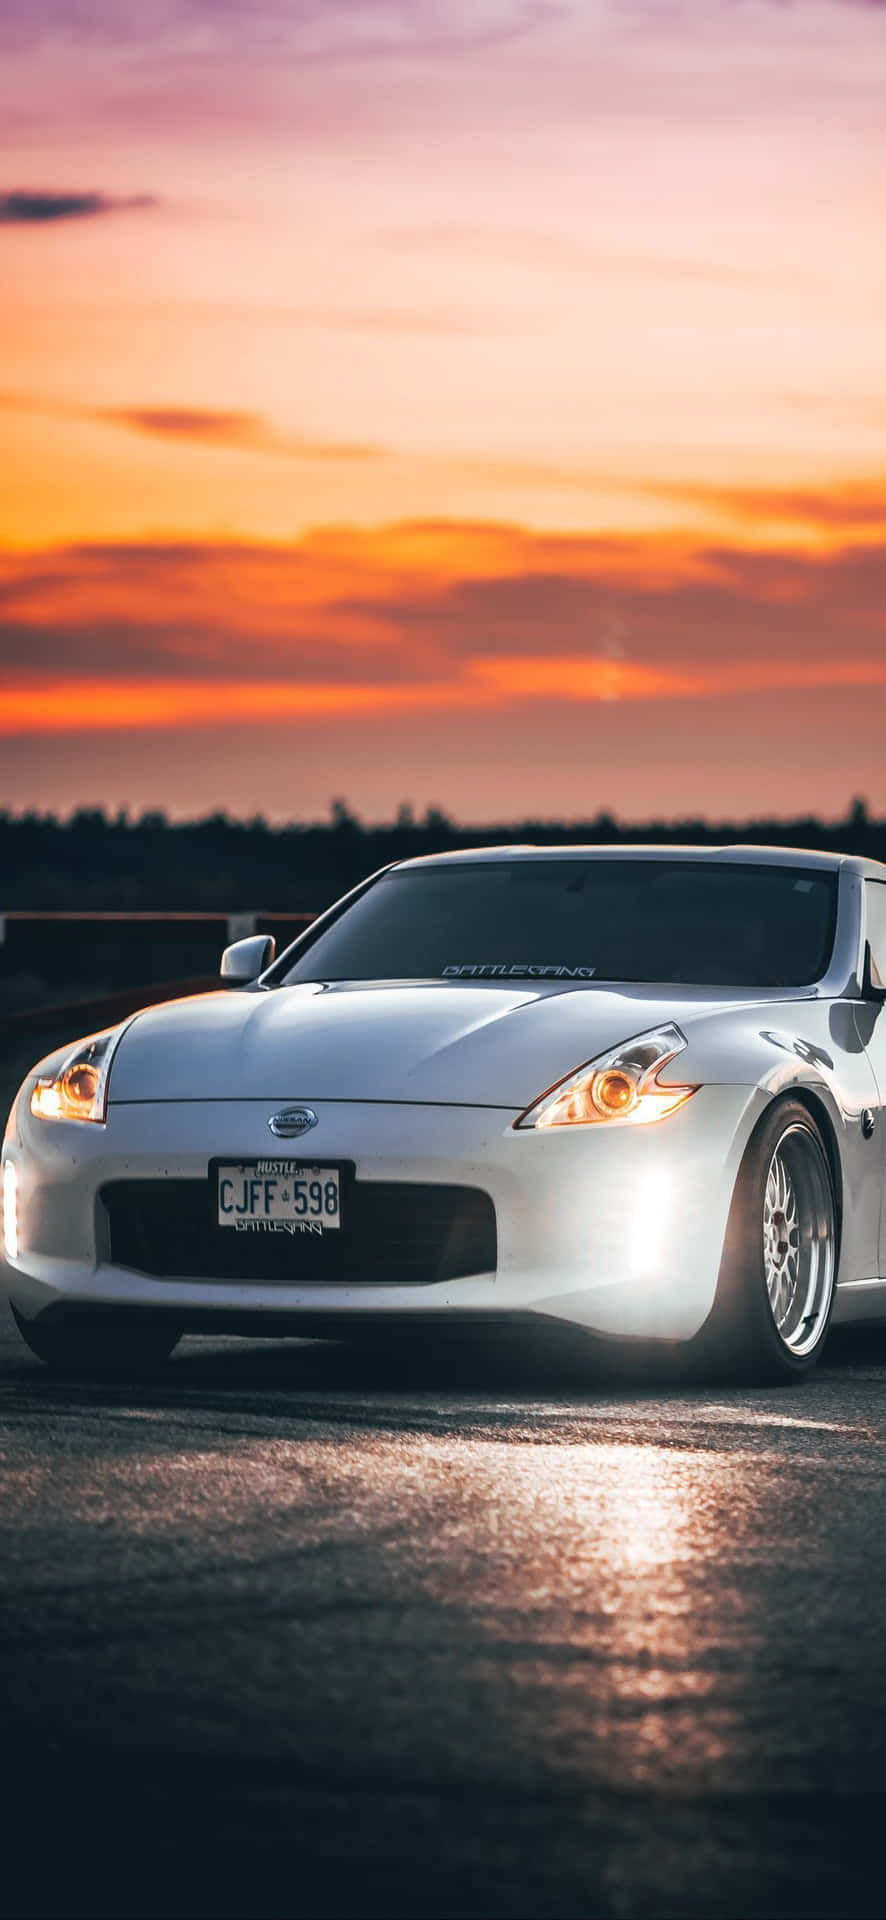 Driving In Style - Nissan 350Z on an Iphone Wallpaper